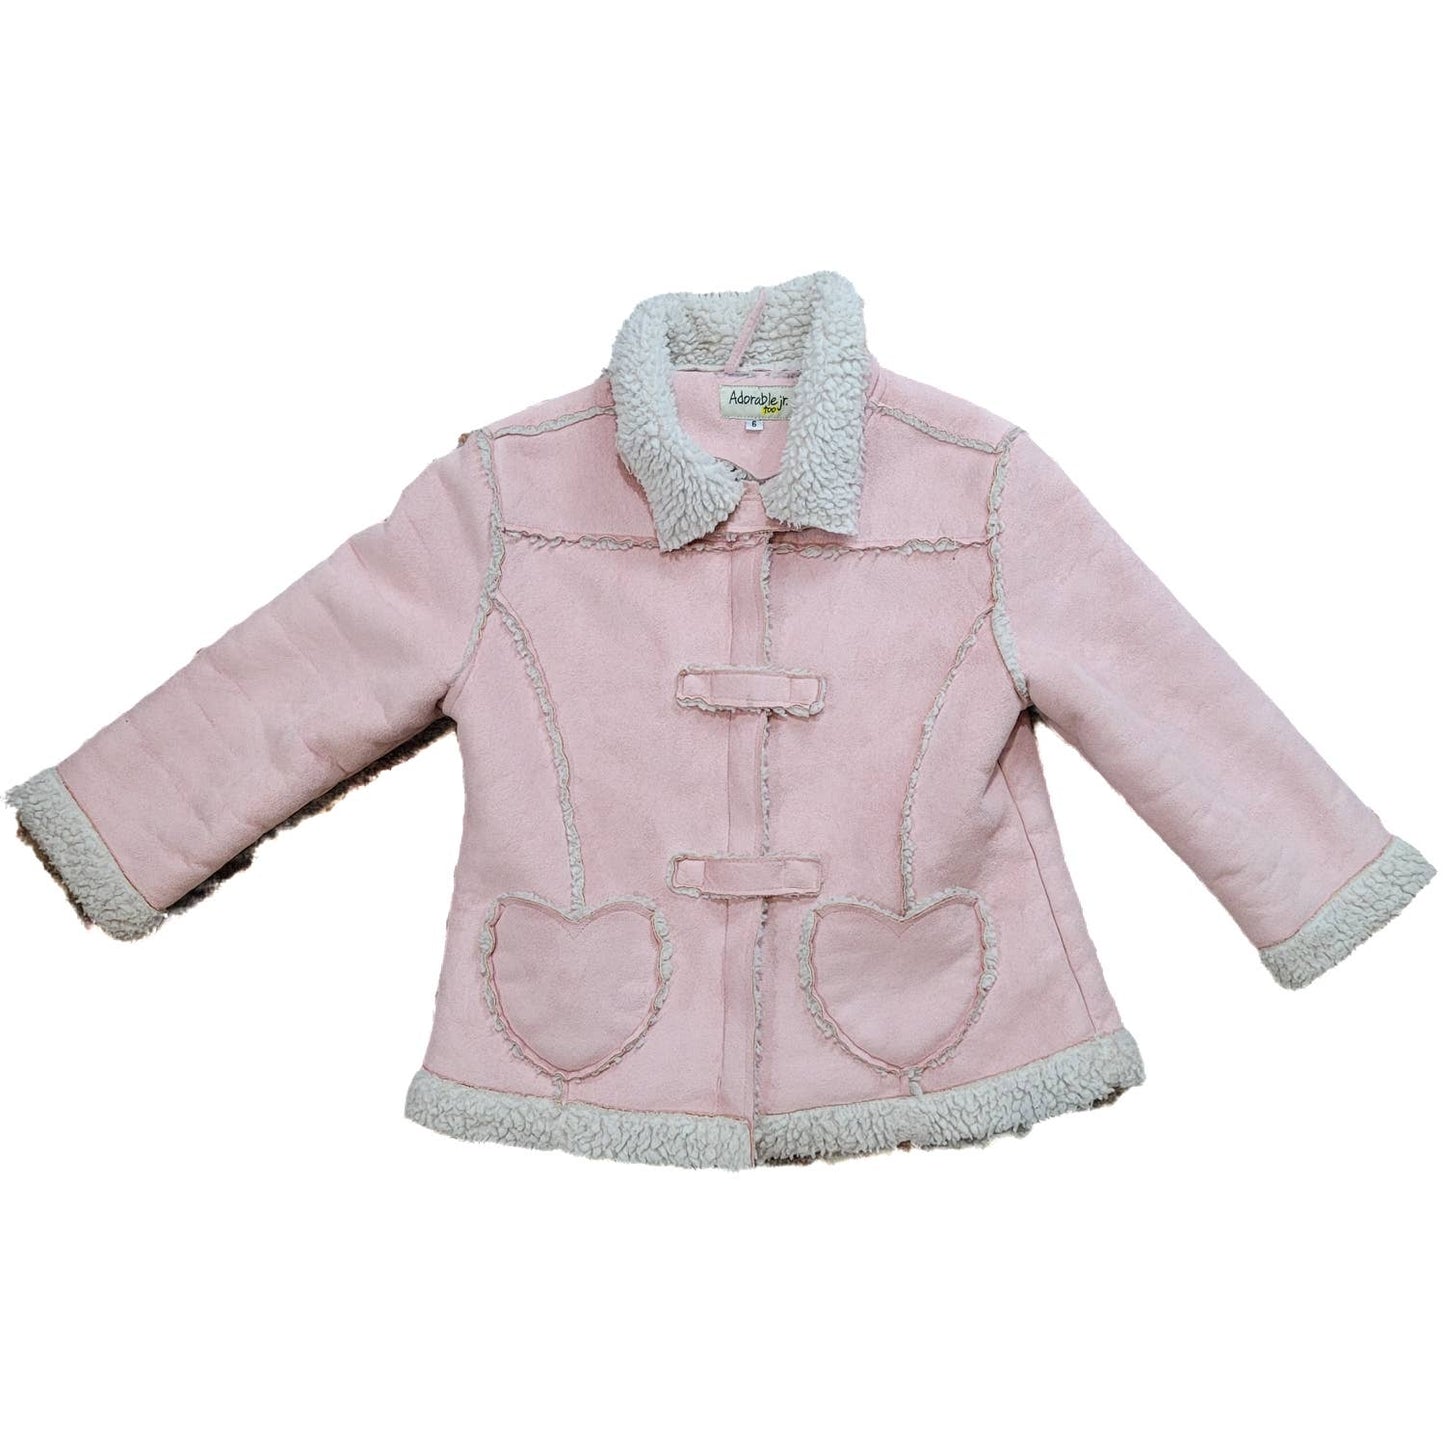 Adorable Junior Too Faux Sherpa Pink Coat - Size 6